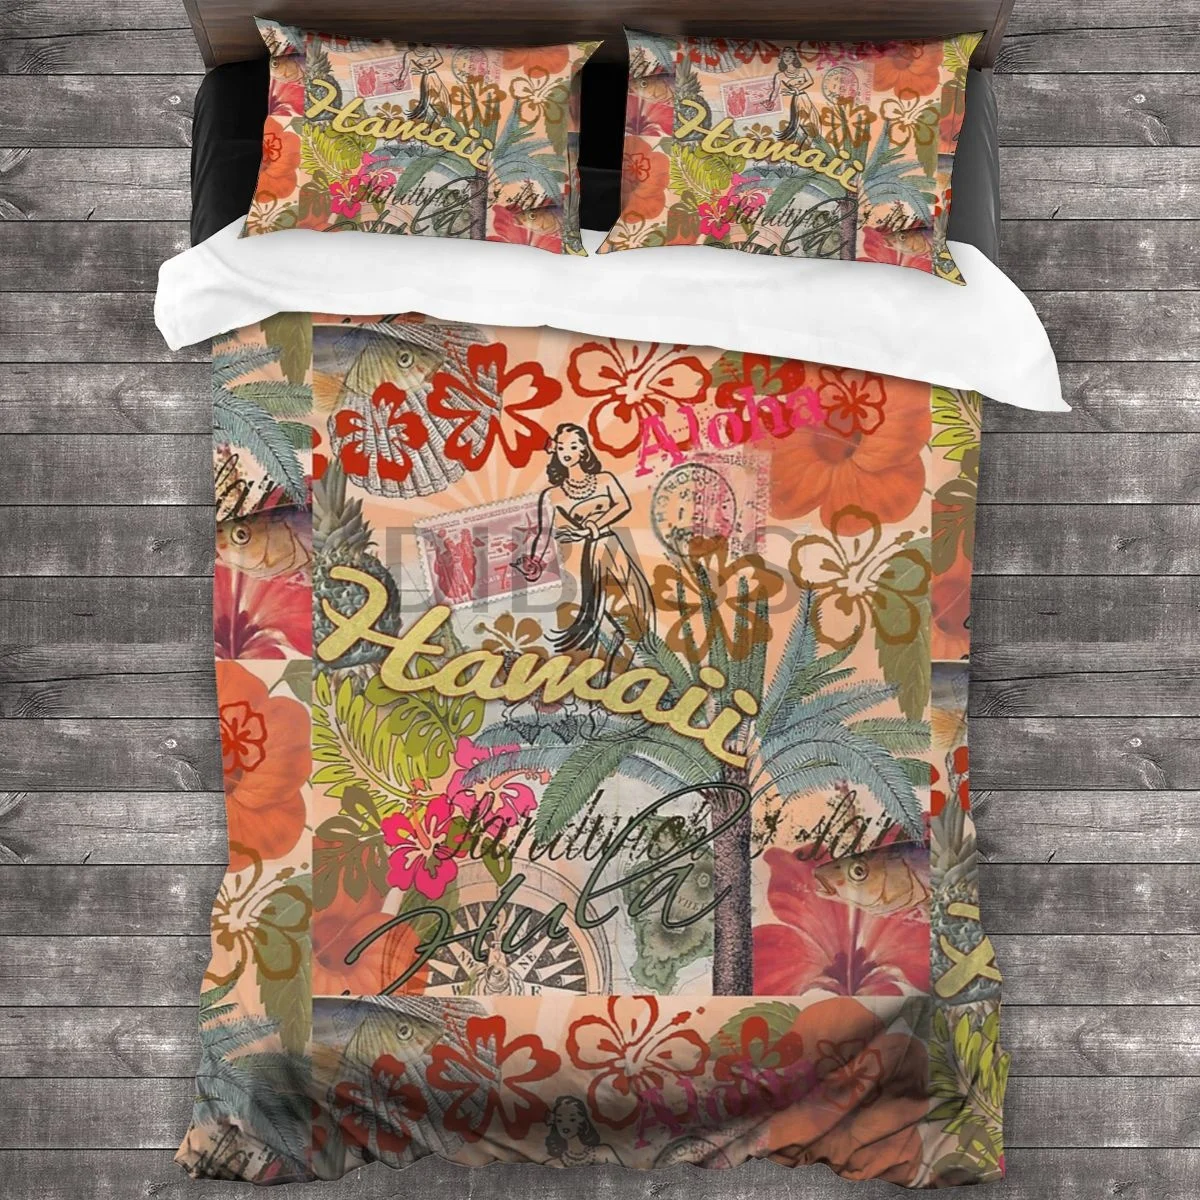 

Vintage Hawaii Travel Colorful Hawaiian Tropical Collage Comforter Set with 2 Pillowcases，Soft Microfiber Bedding Set 3 Piece